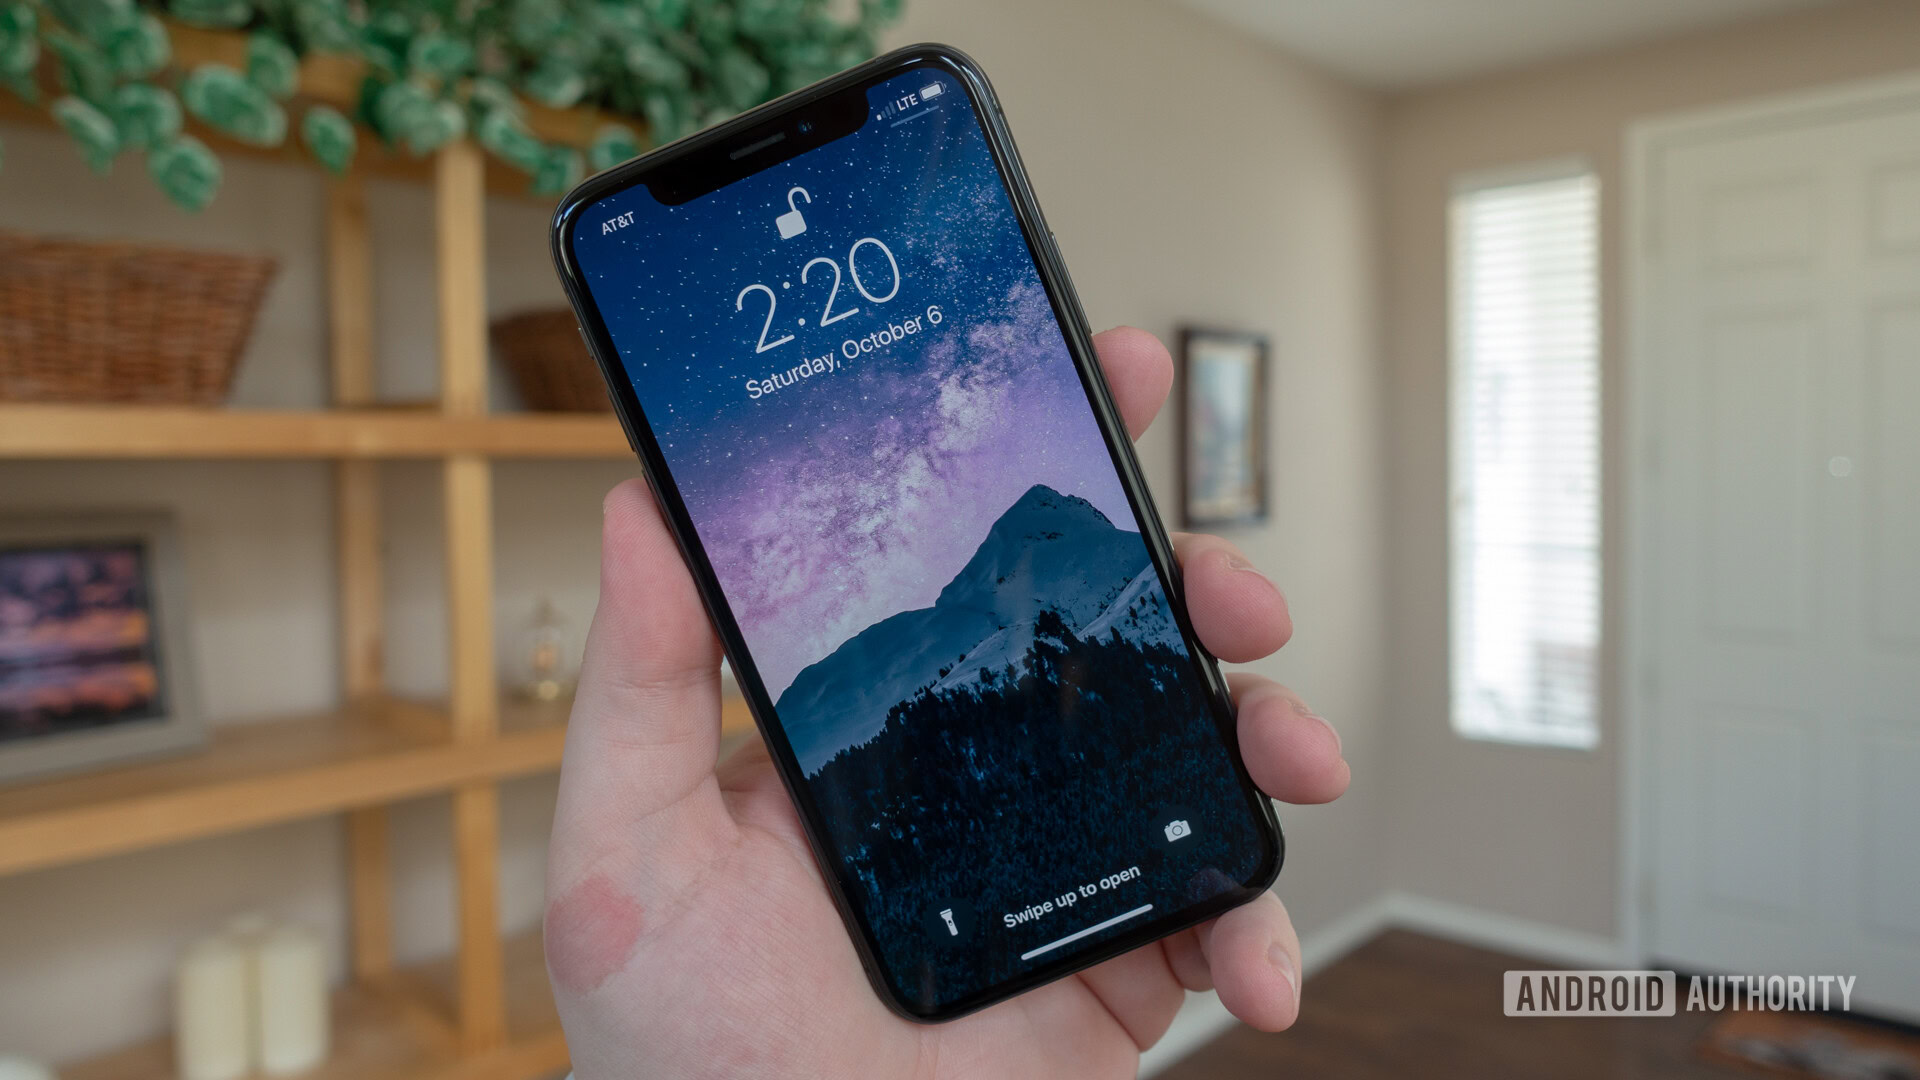 Eight Things Nobody Has Told You About The Apple iPhone XS and iPhone XS Max